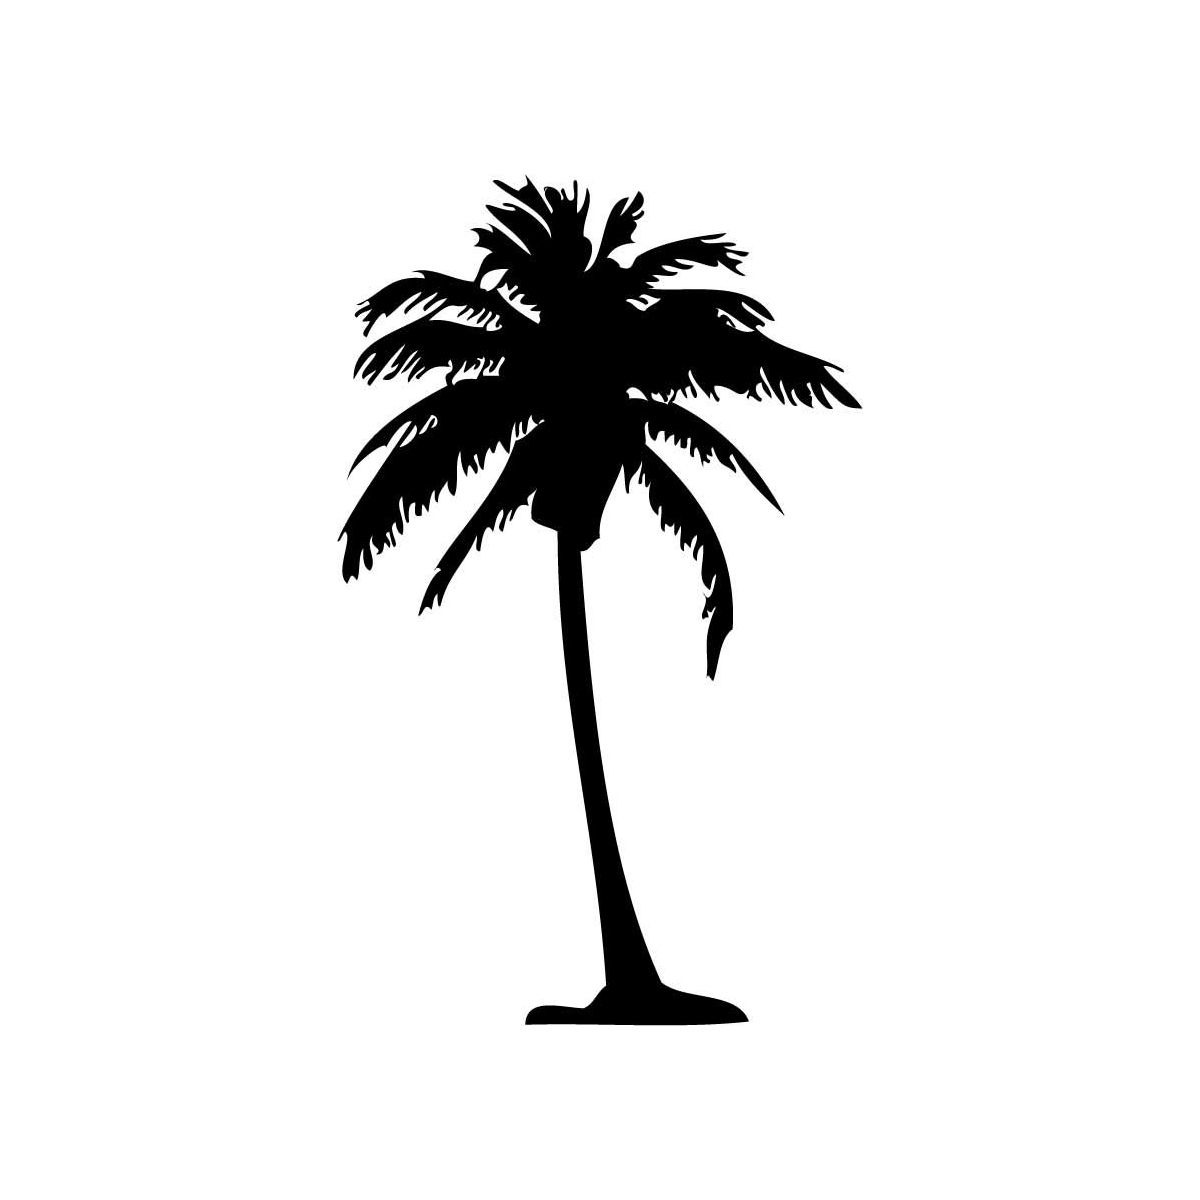 Free Palm Tree Silhouette Png, Download Free Palm Tree Silhouette Png png images, Free ClipArts